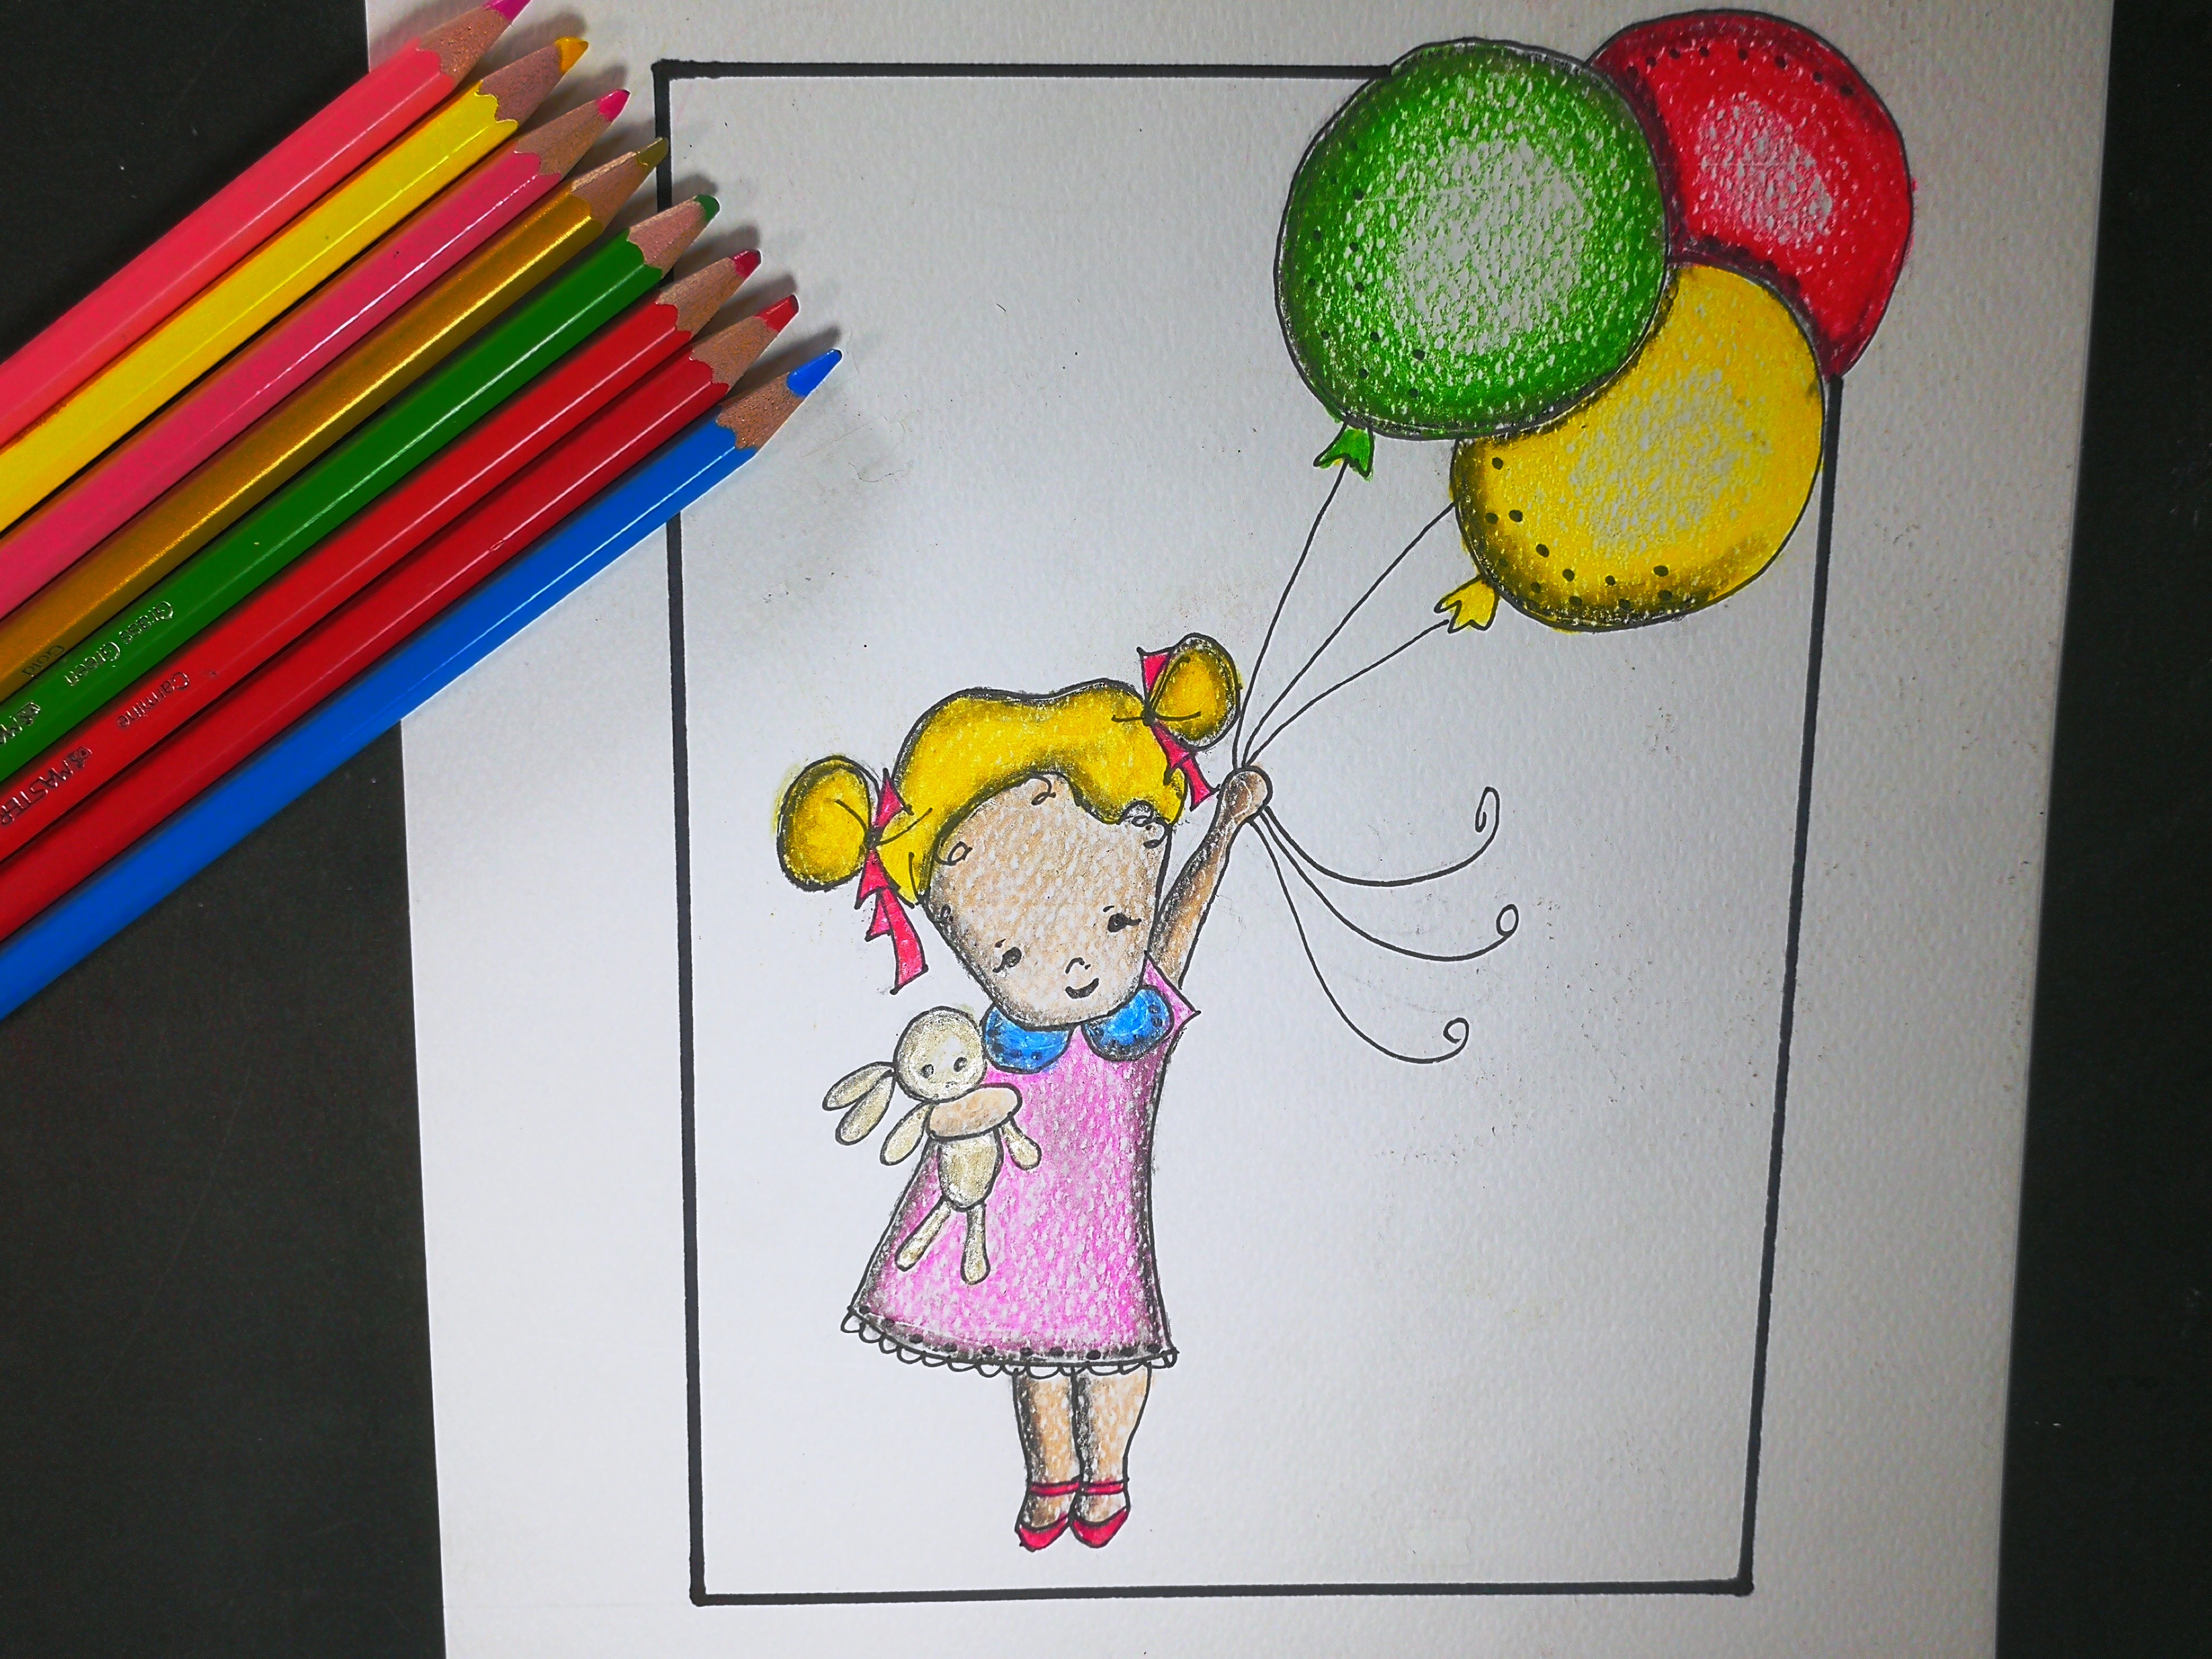 Simple Doodle Sketch Of A Girl Holding Balloon On Paper Background Royalty  Free SVG, Cliparts, Vectors, and Stock Illustration. Image 62693257.